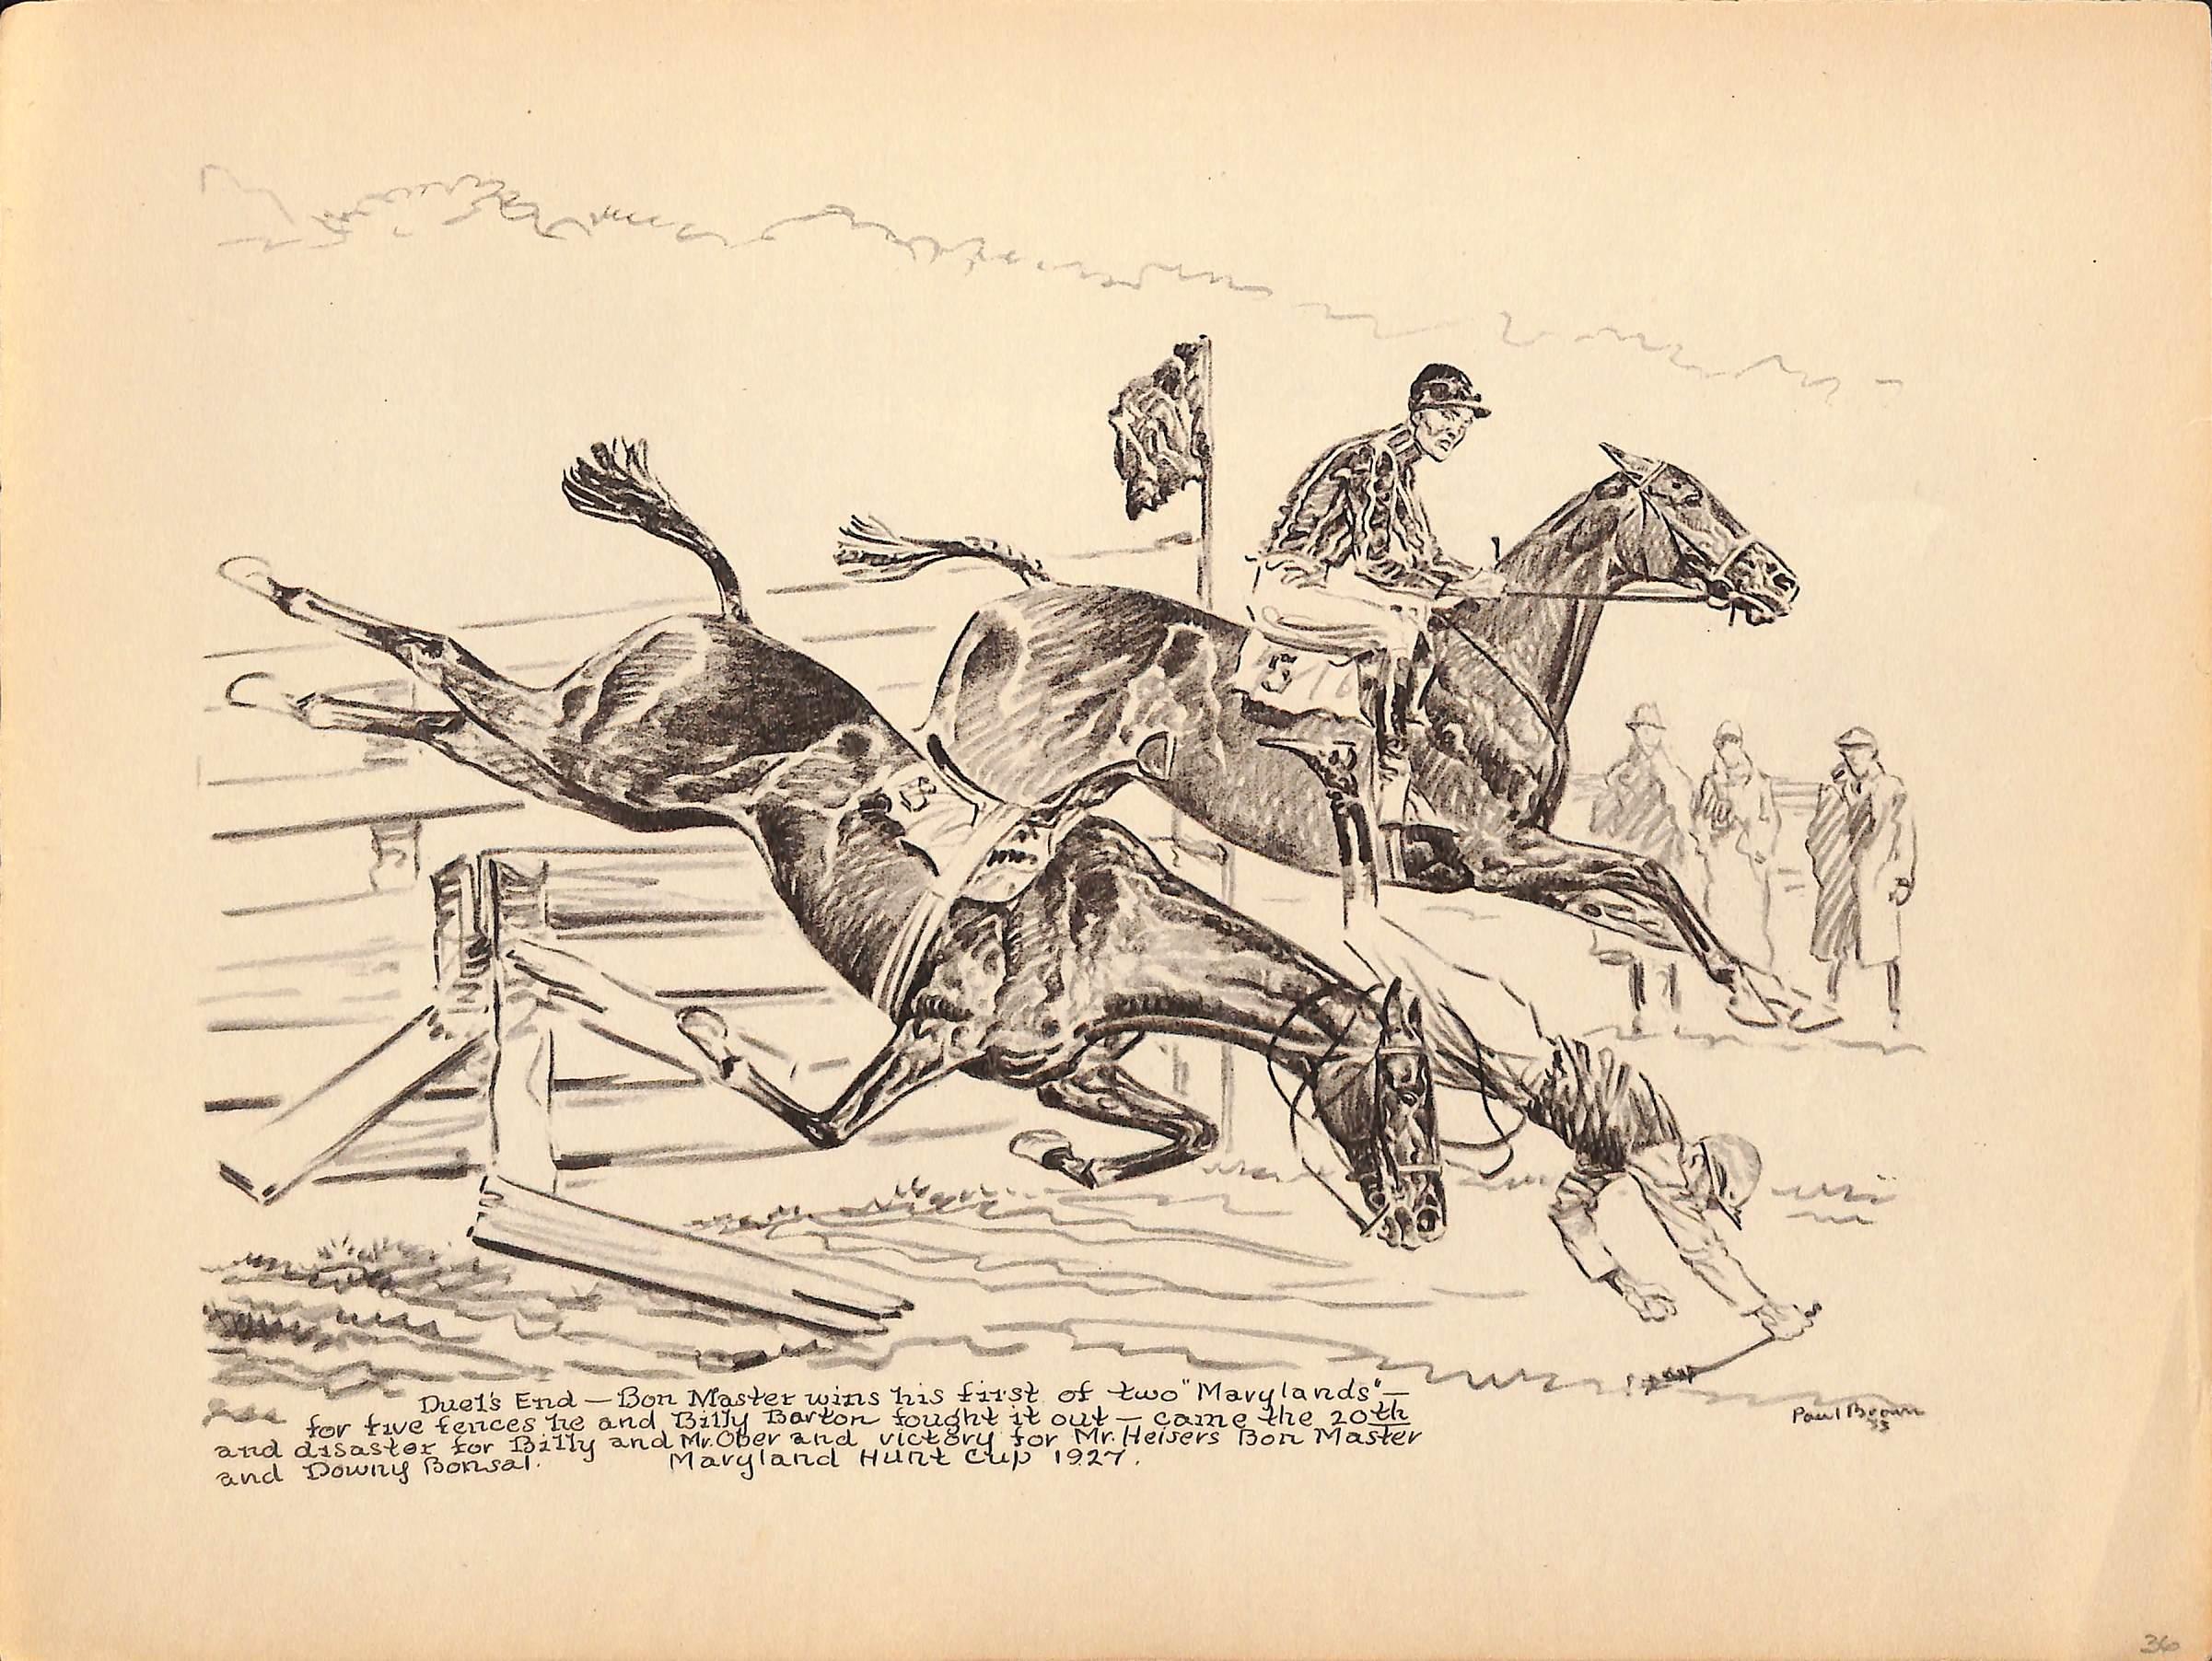 Duel's End Maryland Hunt Cup 1927 - Art by Paul Desmond Brown